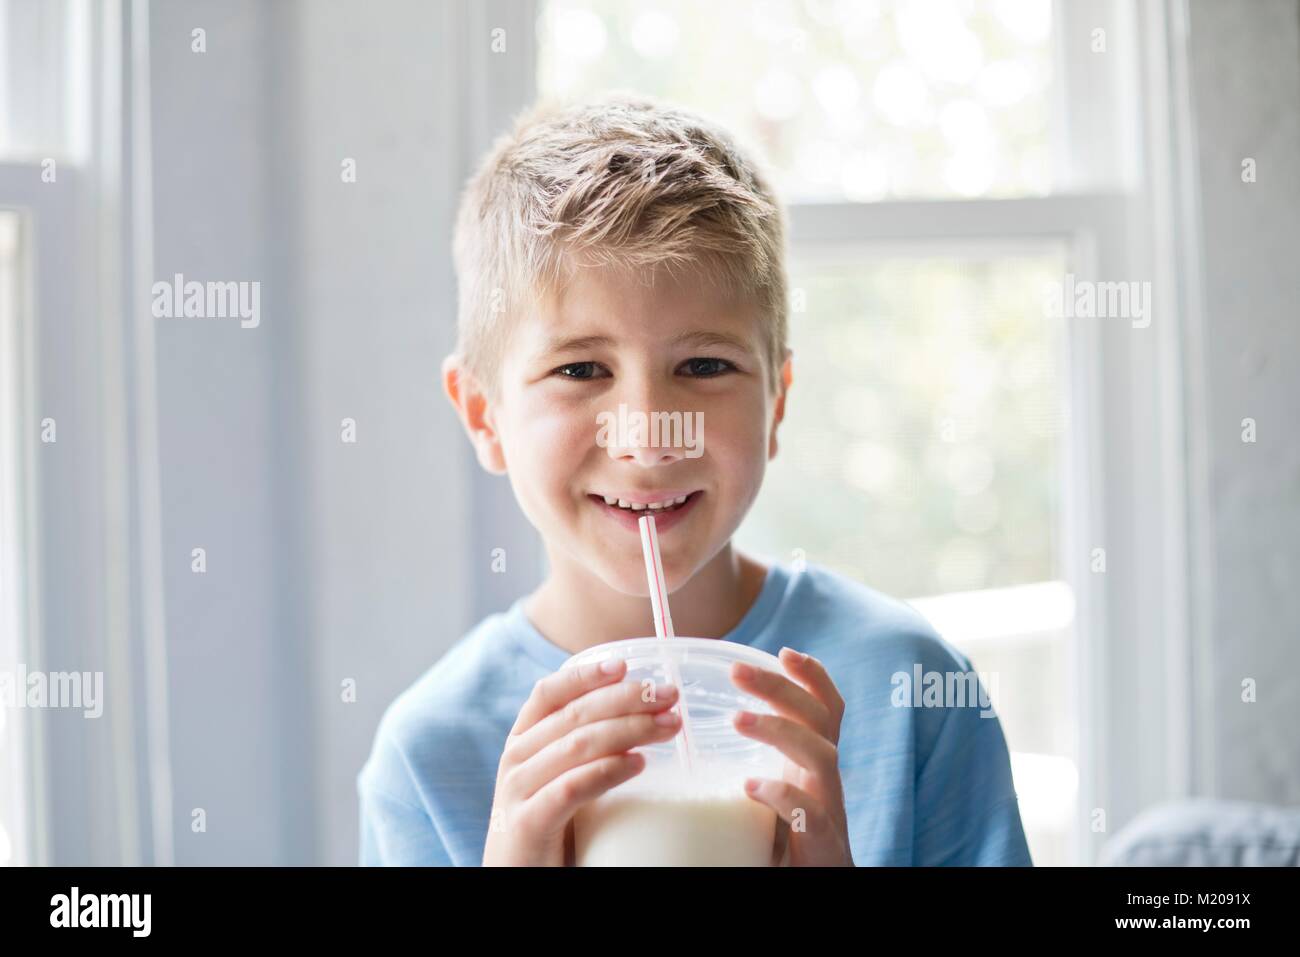 Portrait of a young boy drinking milk through a straw. Stock Photo